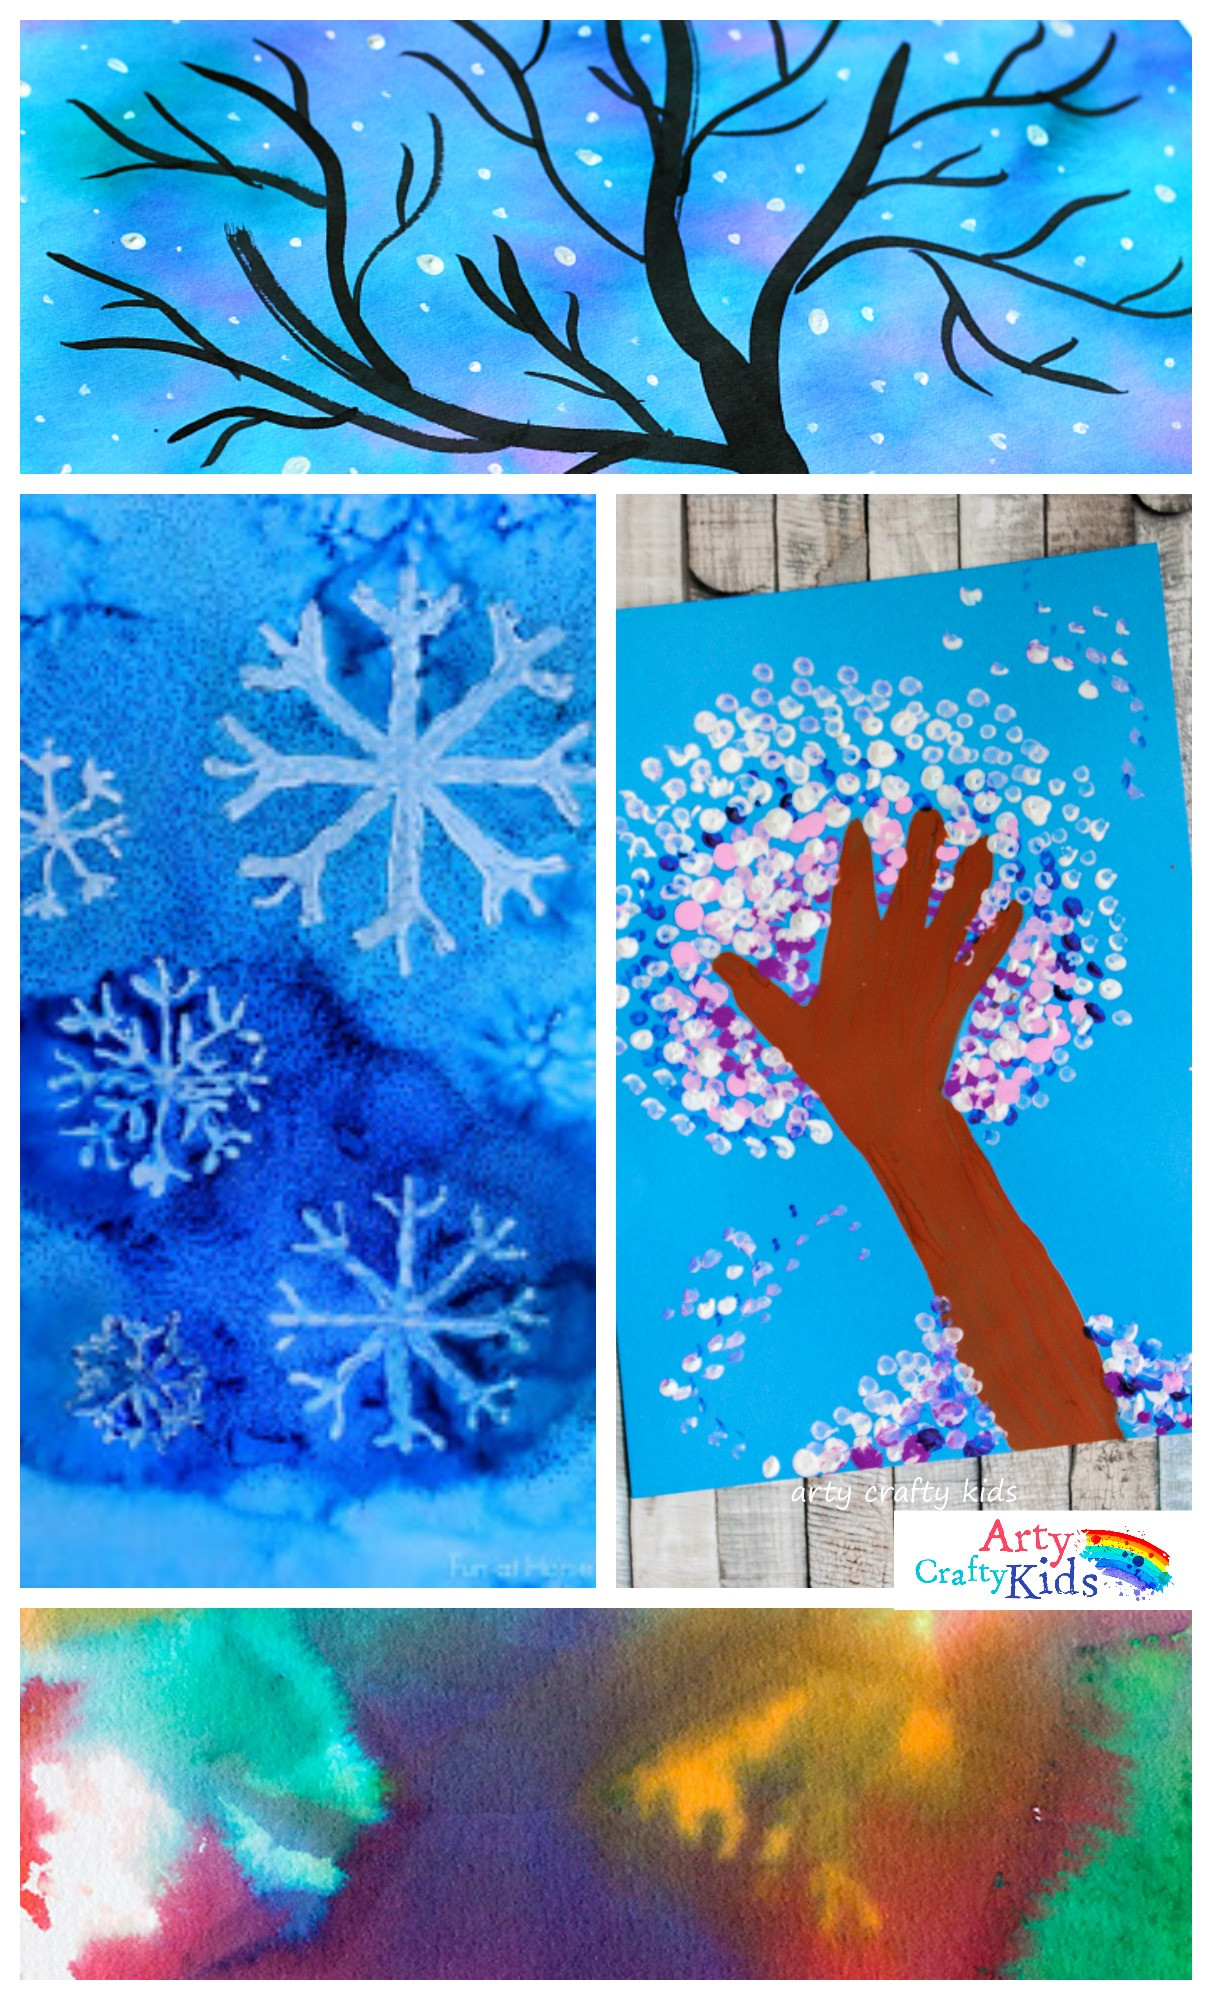 Arts And Crafts Projects For Toddlers
 14 Wonderful Winter Art Projects for Kids Arty Crafty Kids